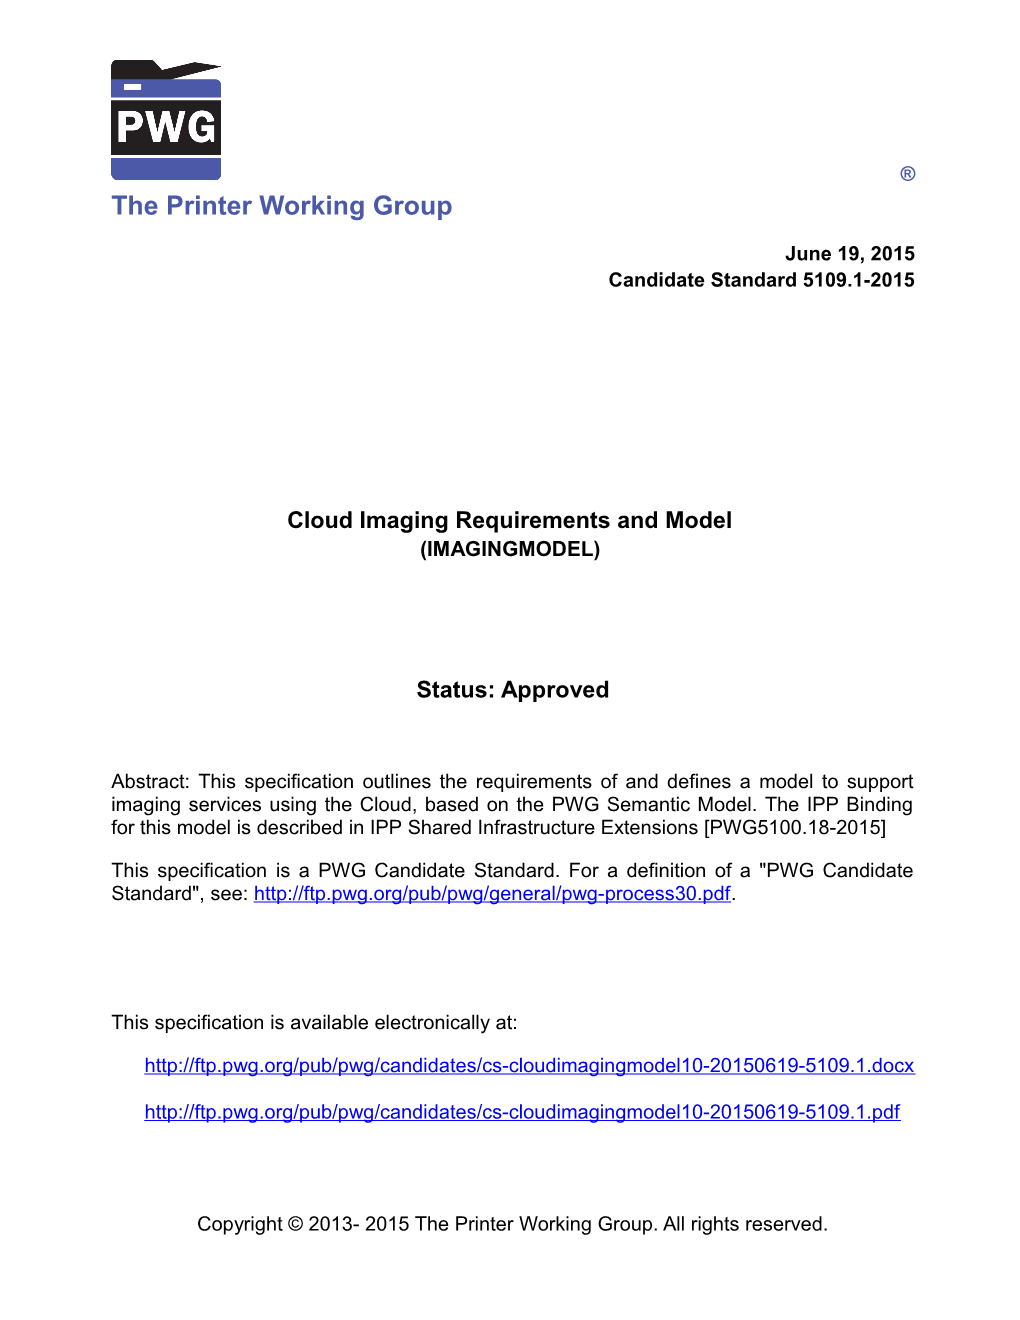 Cloud Imaging Requirements and Model